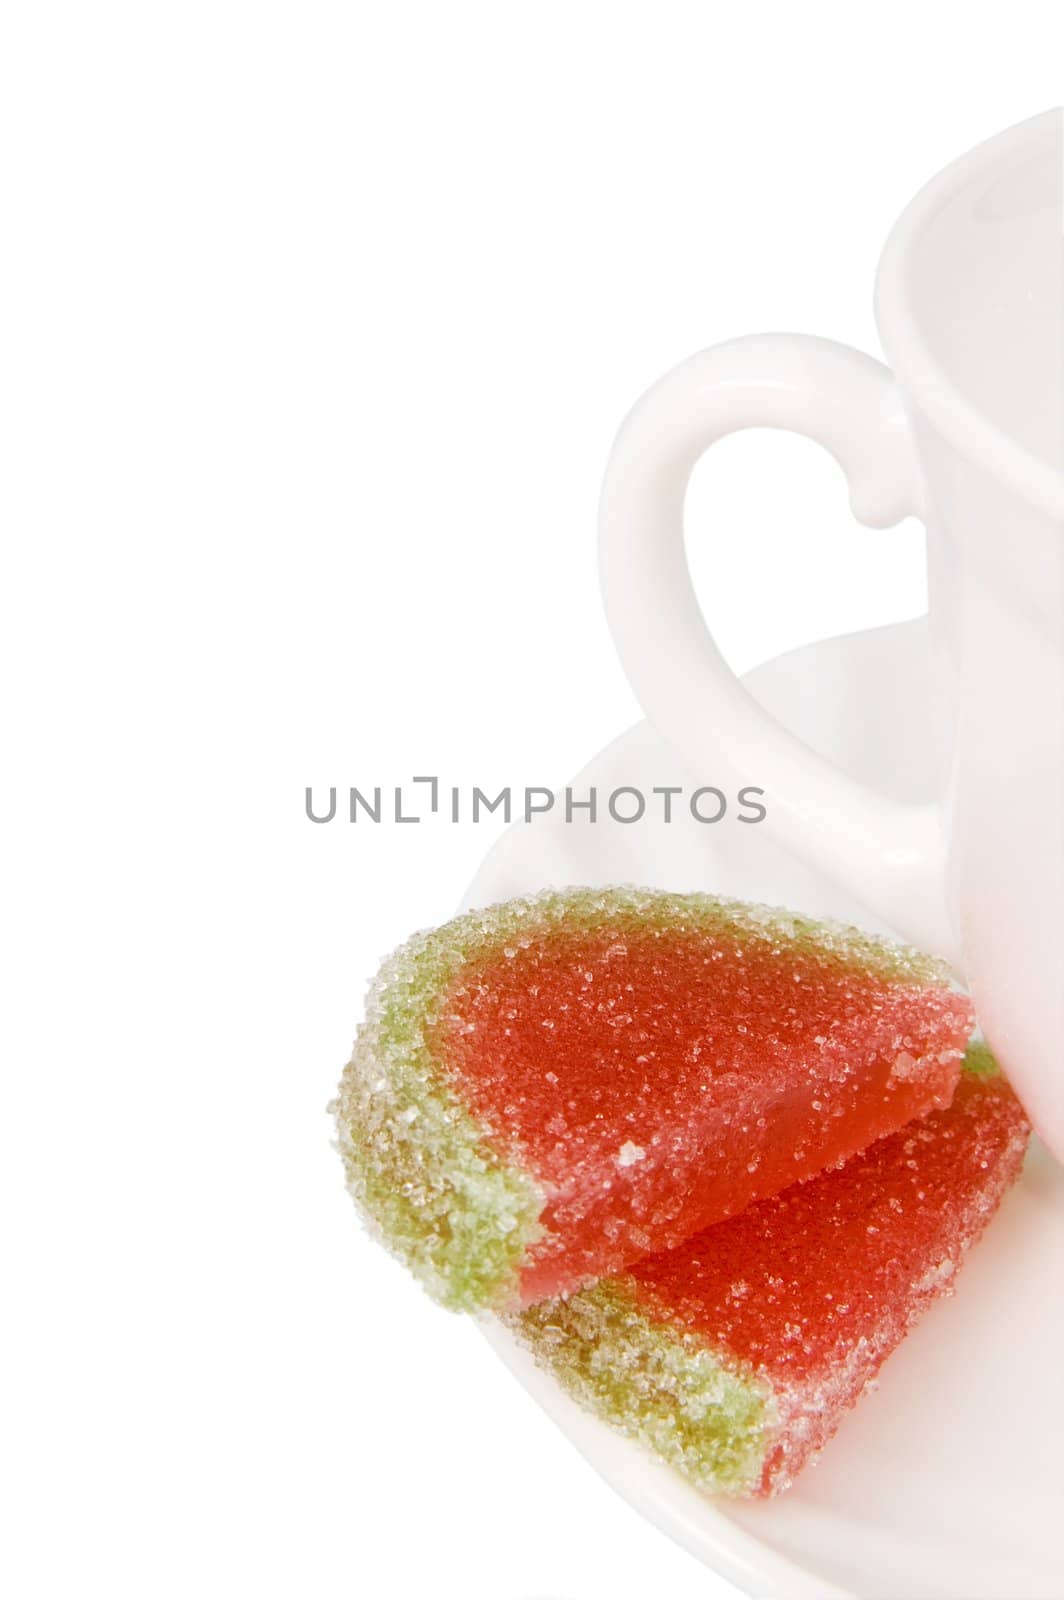 White tea cup and piece of fruit candy